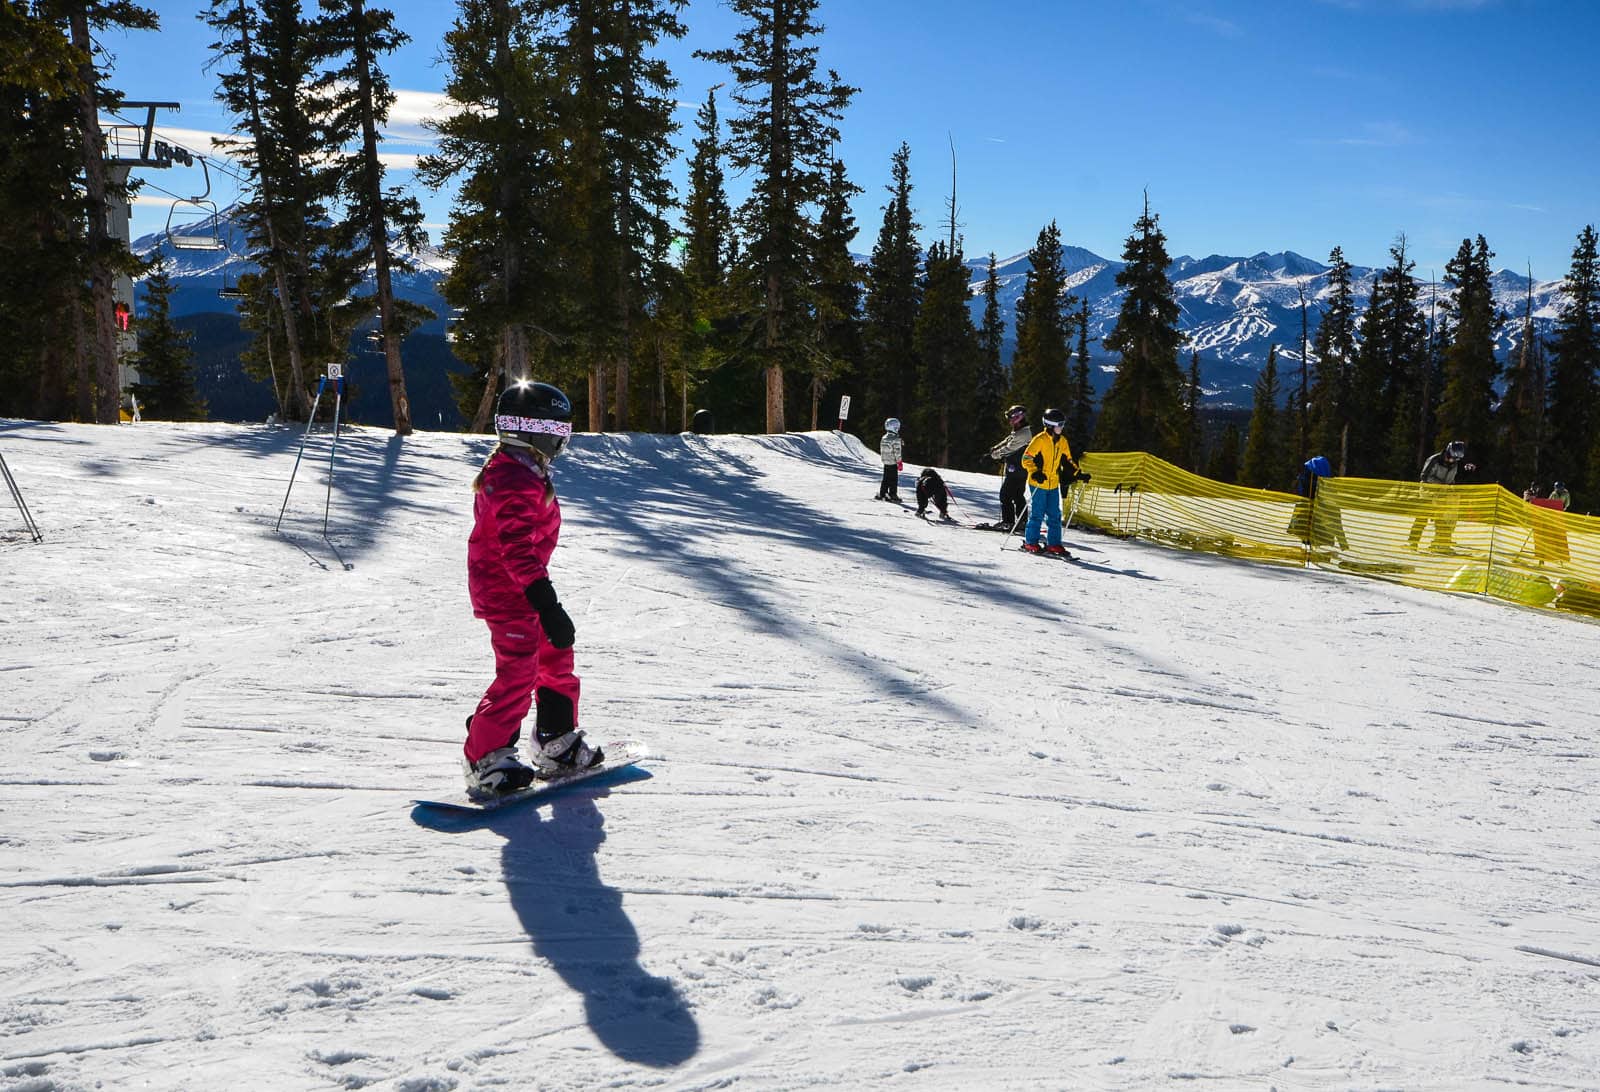 Young girl snowboarder, dressed all in pink, at Keystone in Colorado.